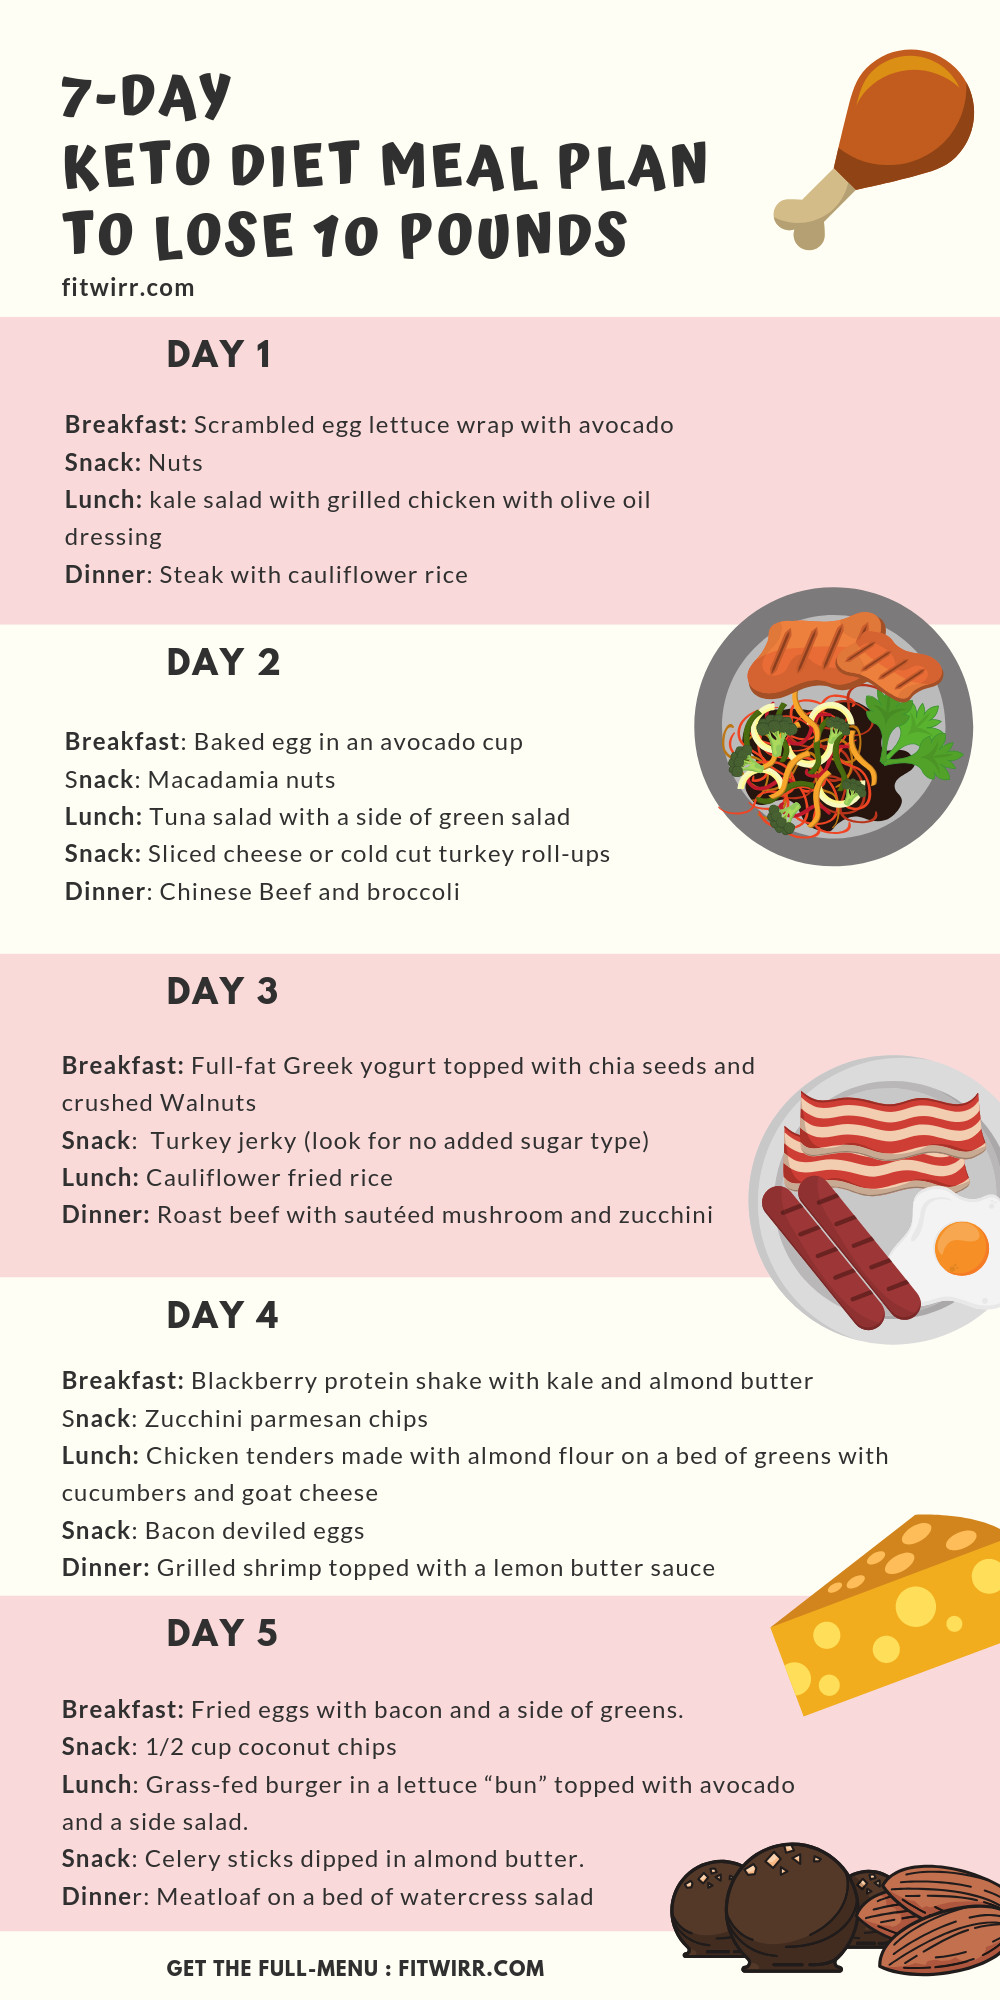 Keto Diet For Beginners Meal Plan With Grocery List Week 1
 Keto Diet Menu 7 Day Keto Meal Plan for Beginners to Lose